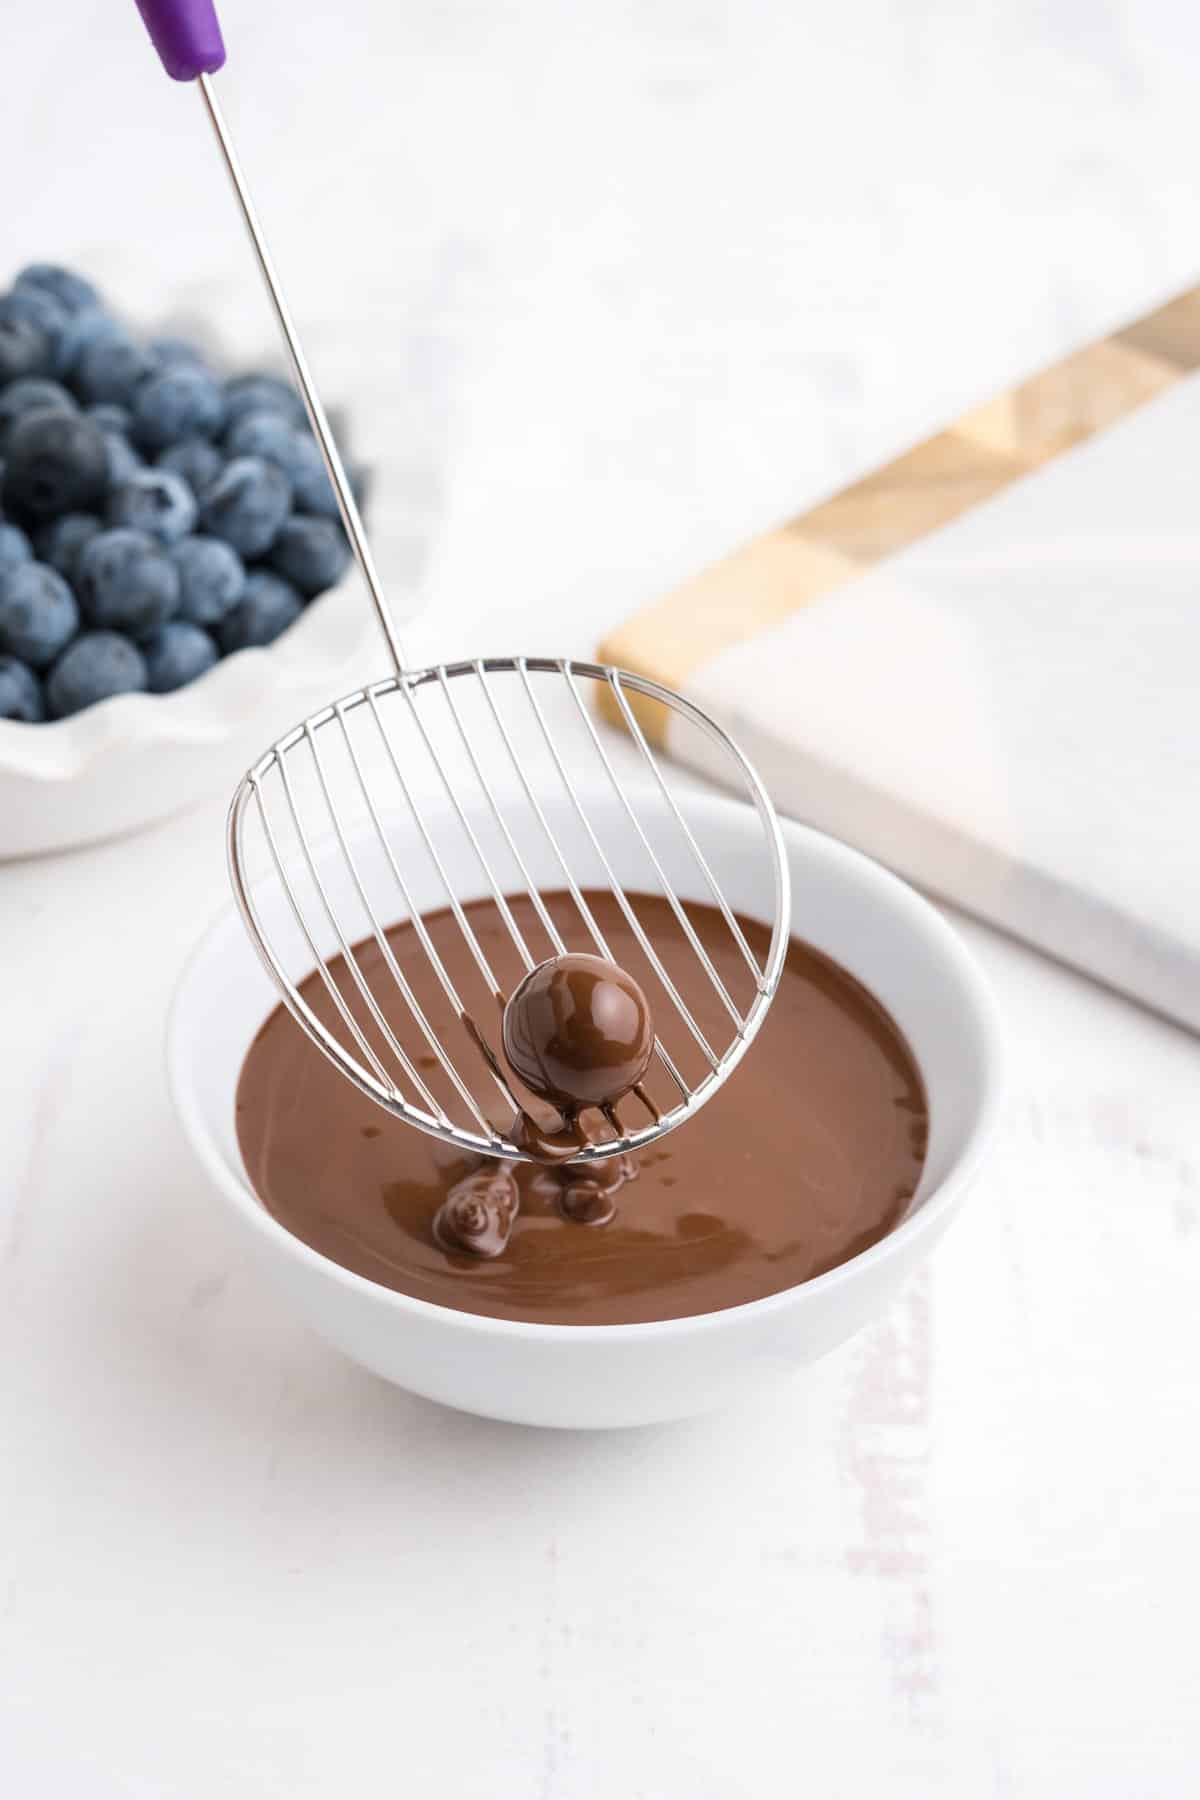 Dipping a blueberry in the chocolate sauce.